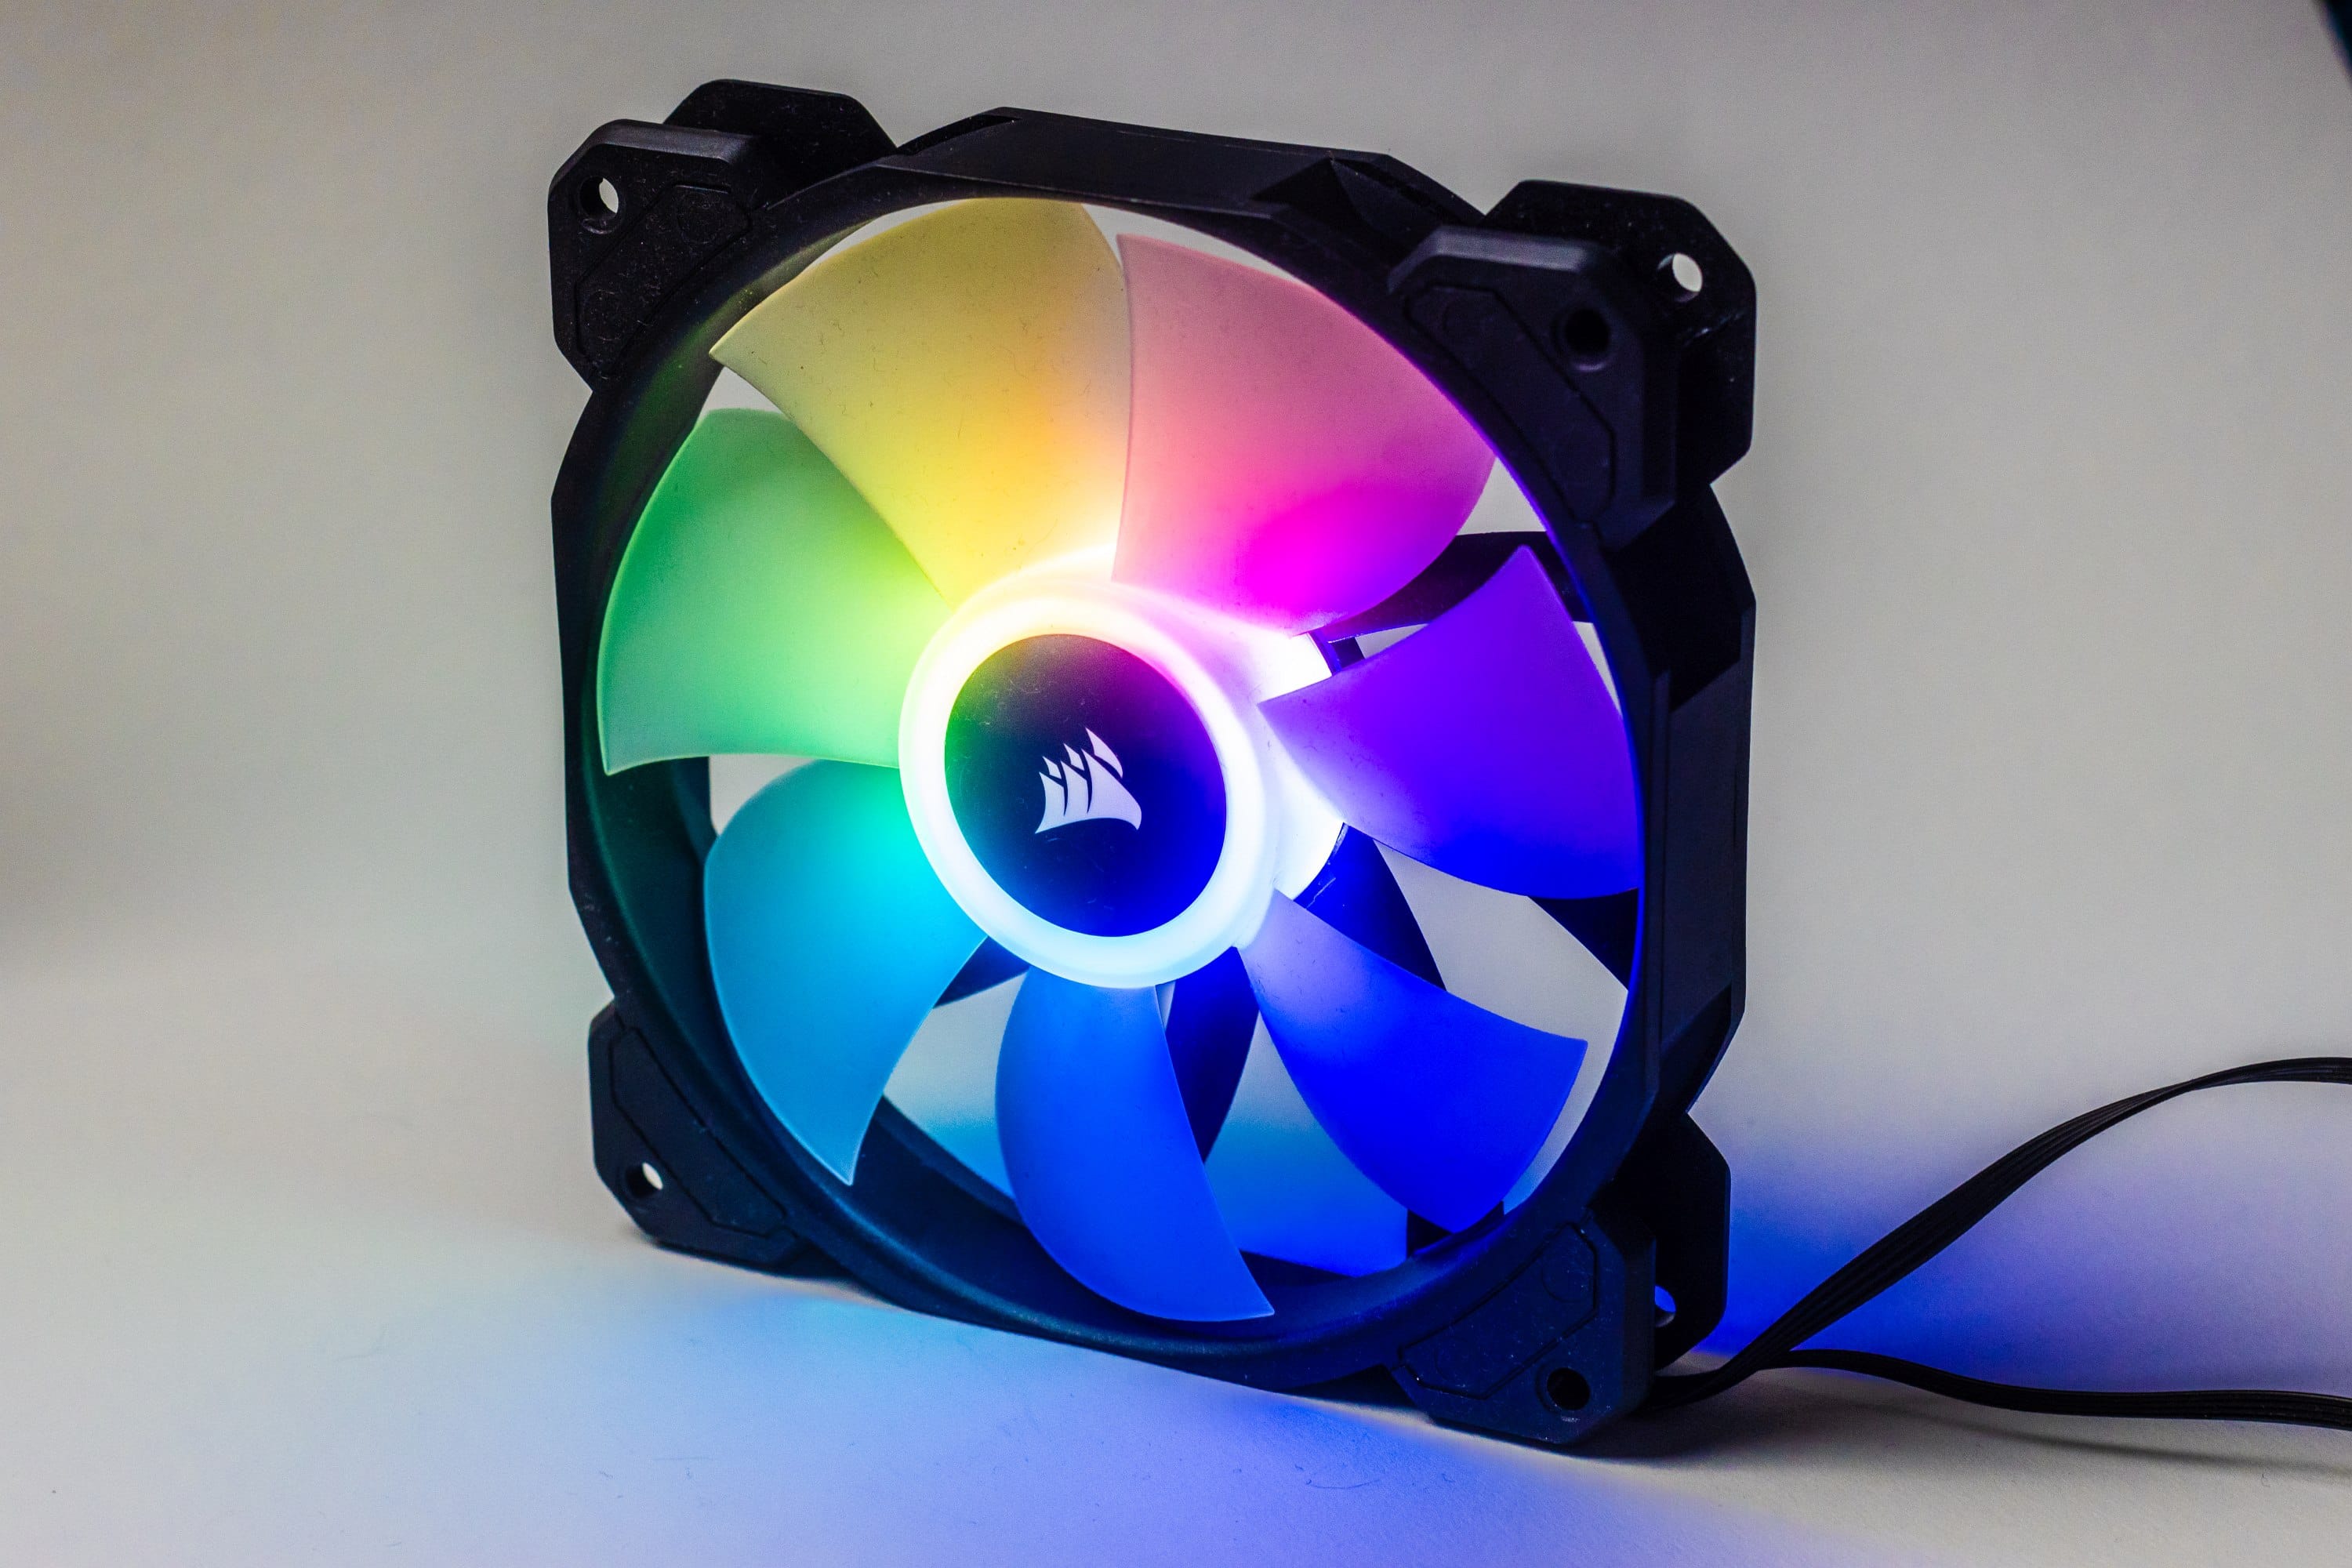 on! pressure SP Corsair - fan the put RGB Elite they test